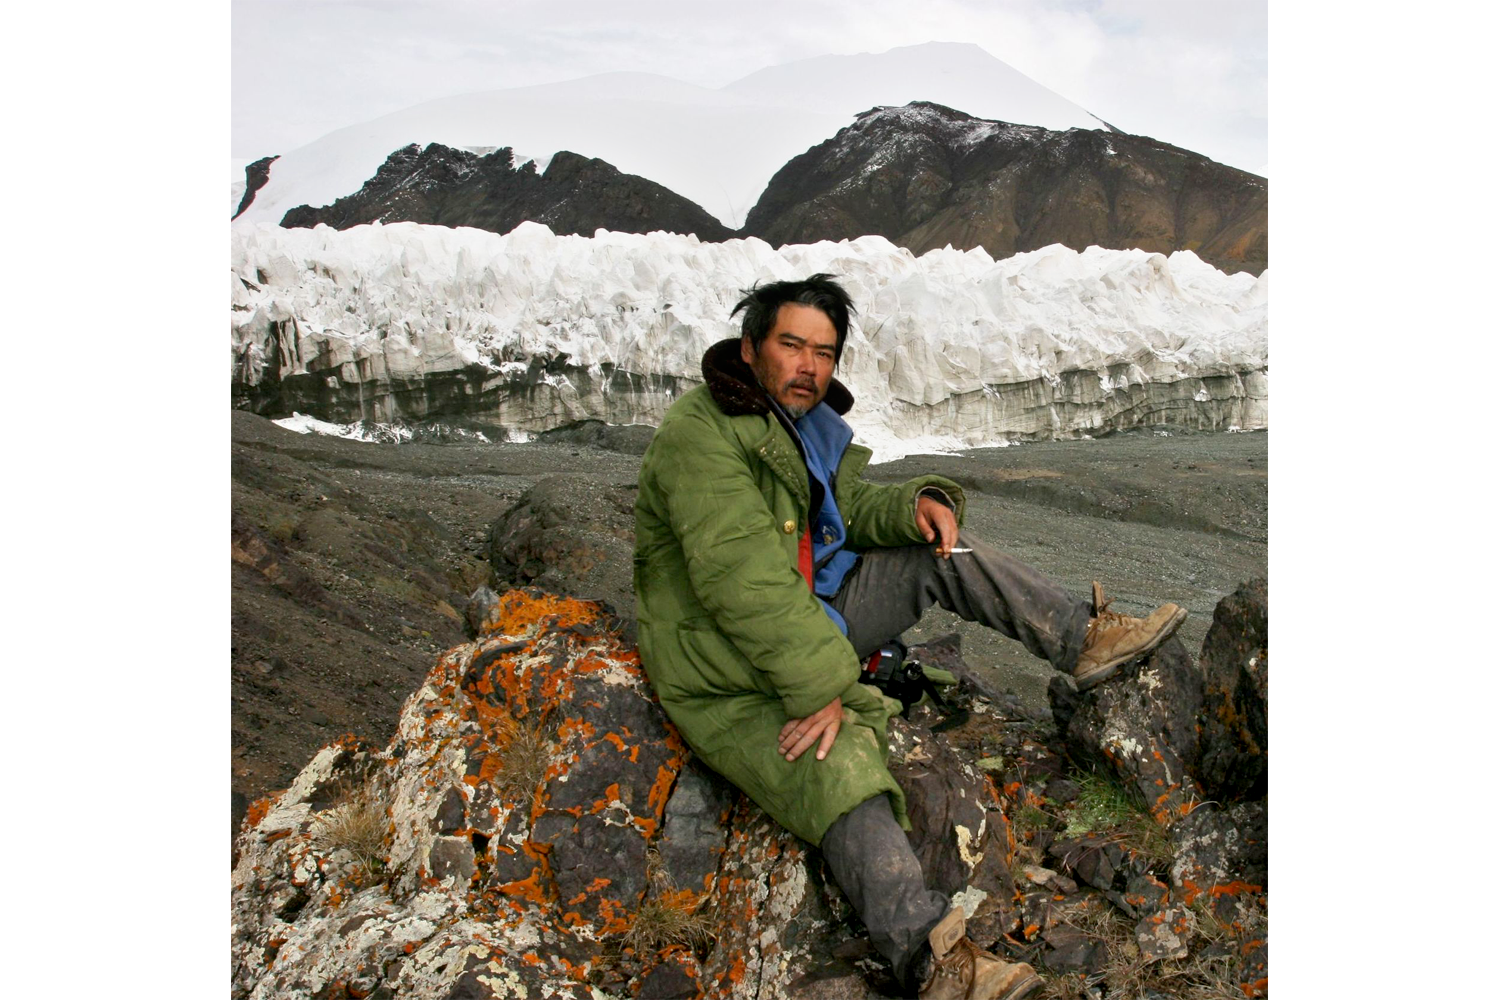 Geologist and glaciologist Yang Yong, by the glaciers that feed the Yangtze on the Qinghai Tibet plateau. Photo by Yang Yong.